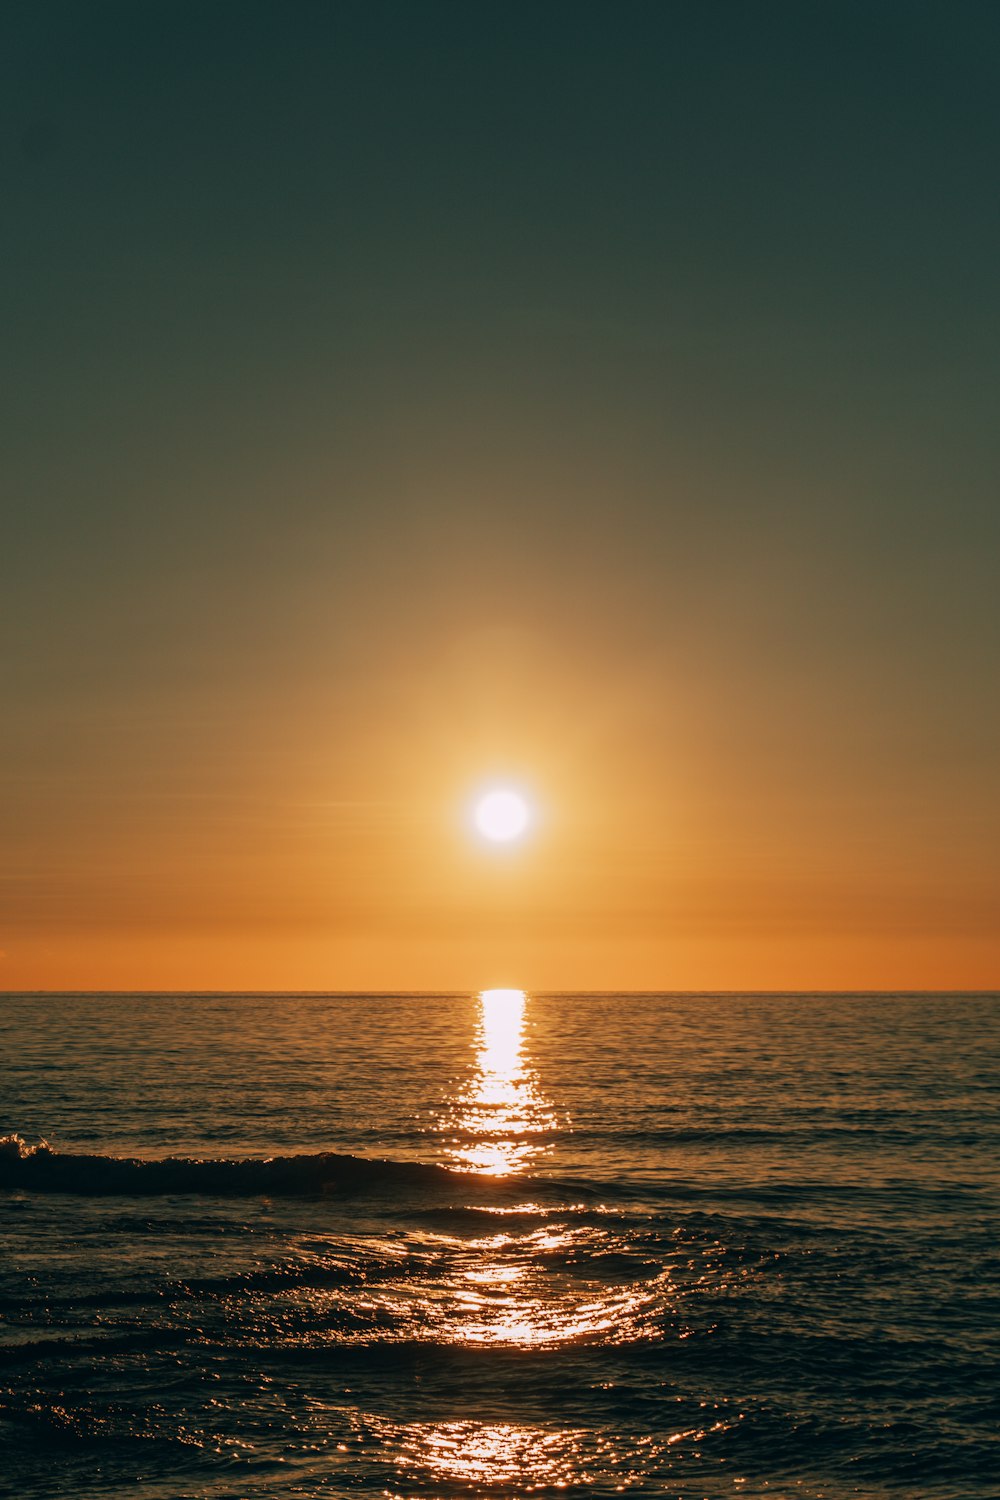 the sun is setting over the ocean on a clear day